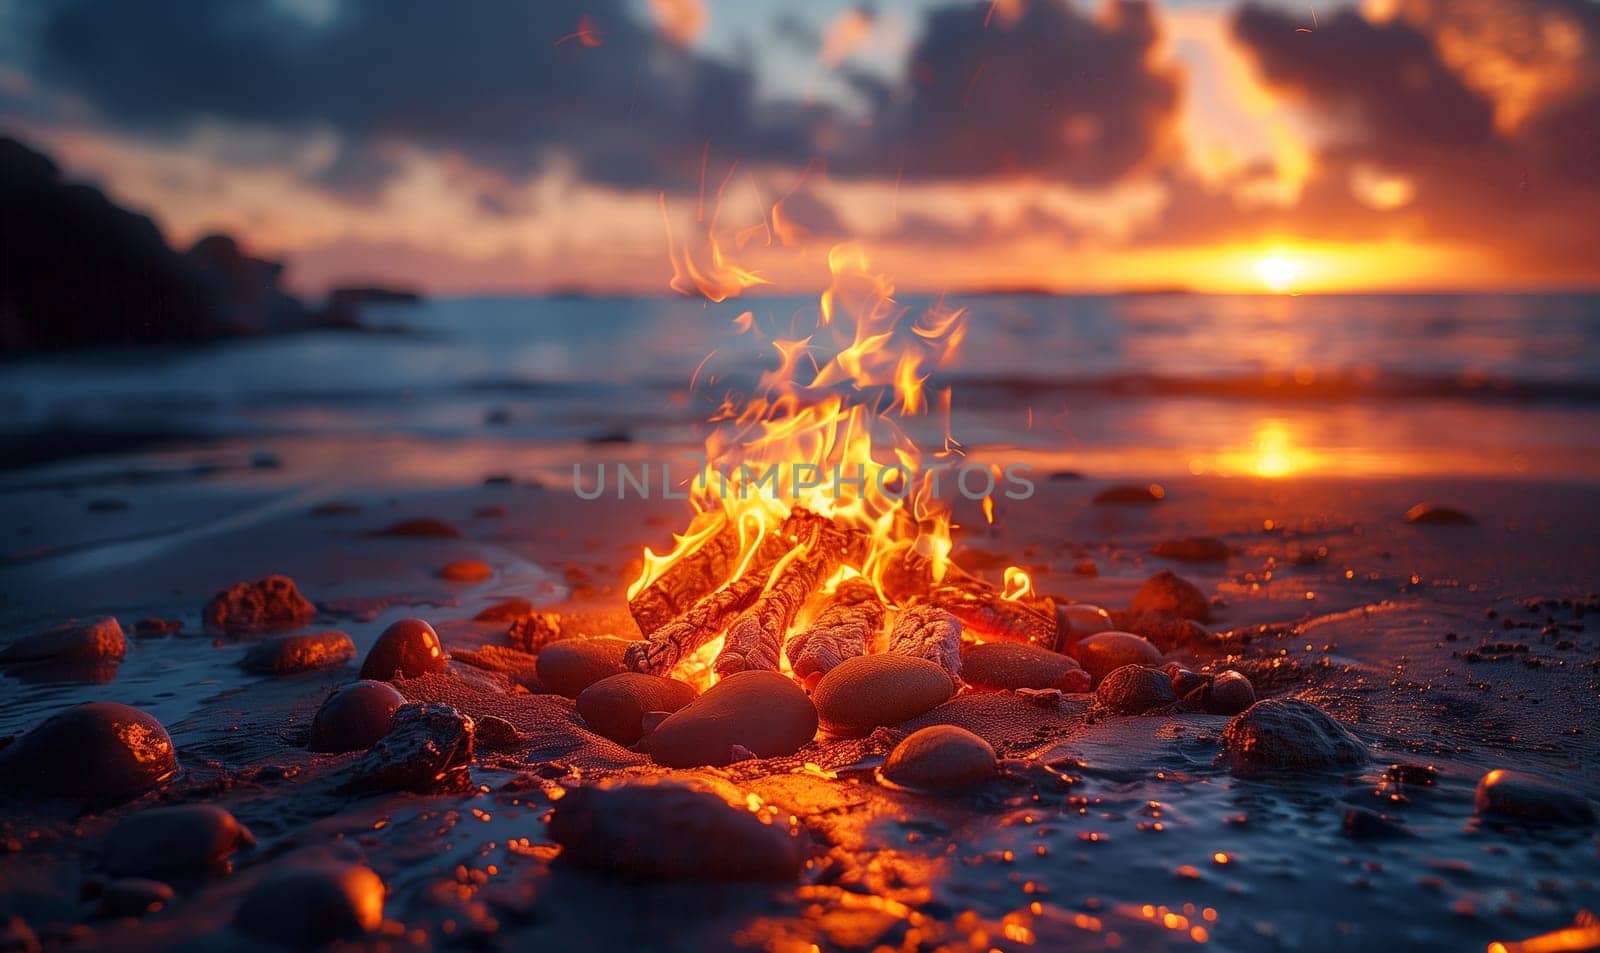 A fire on the shore against the backdrop of a colorful sunset. Selective focus